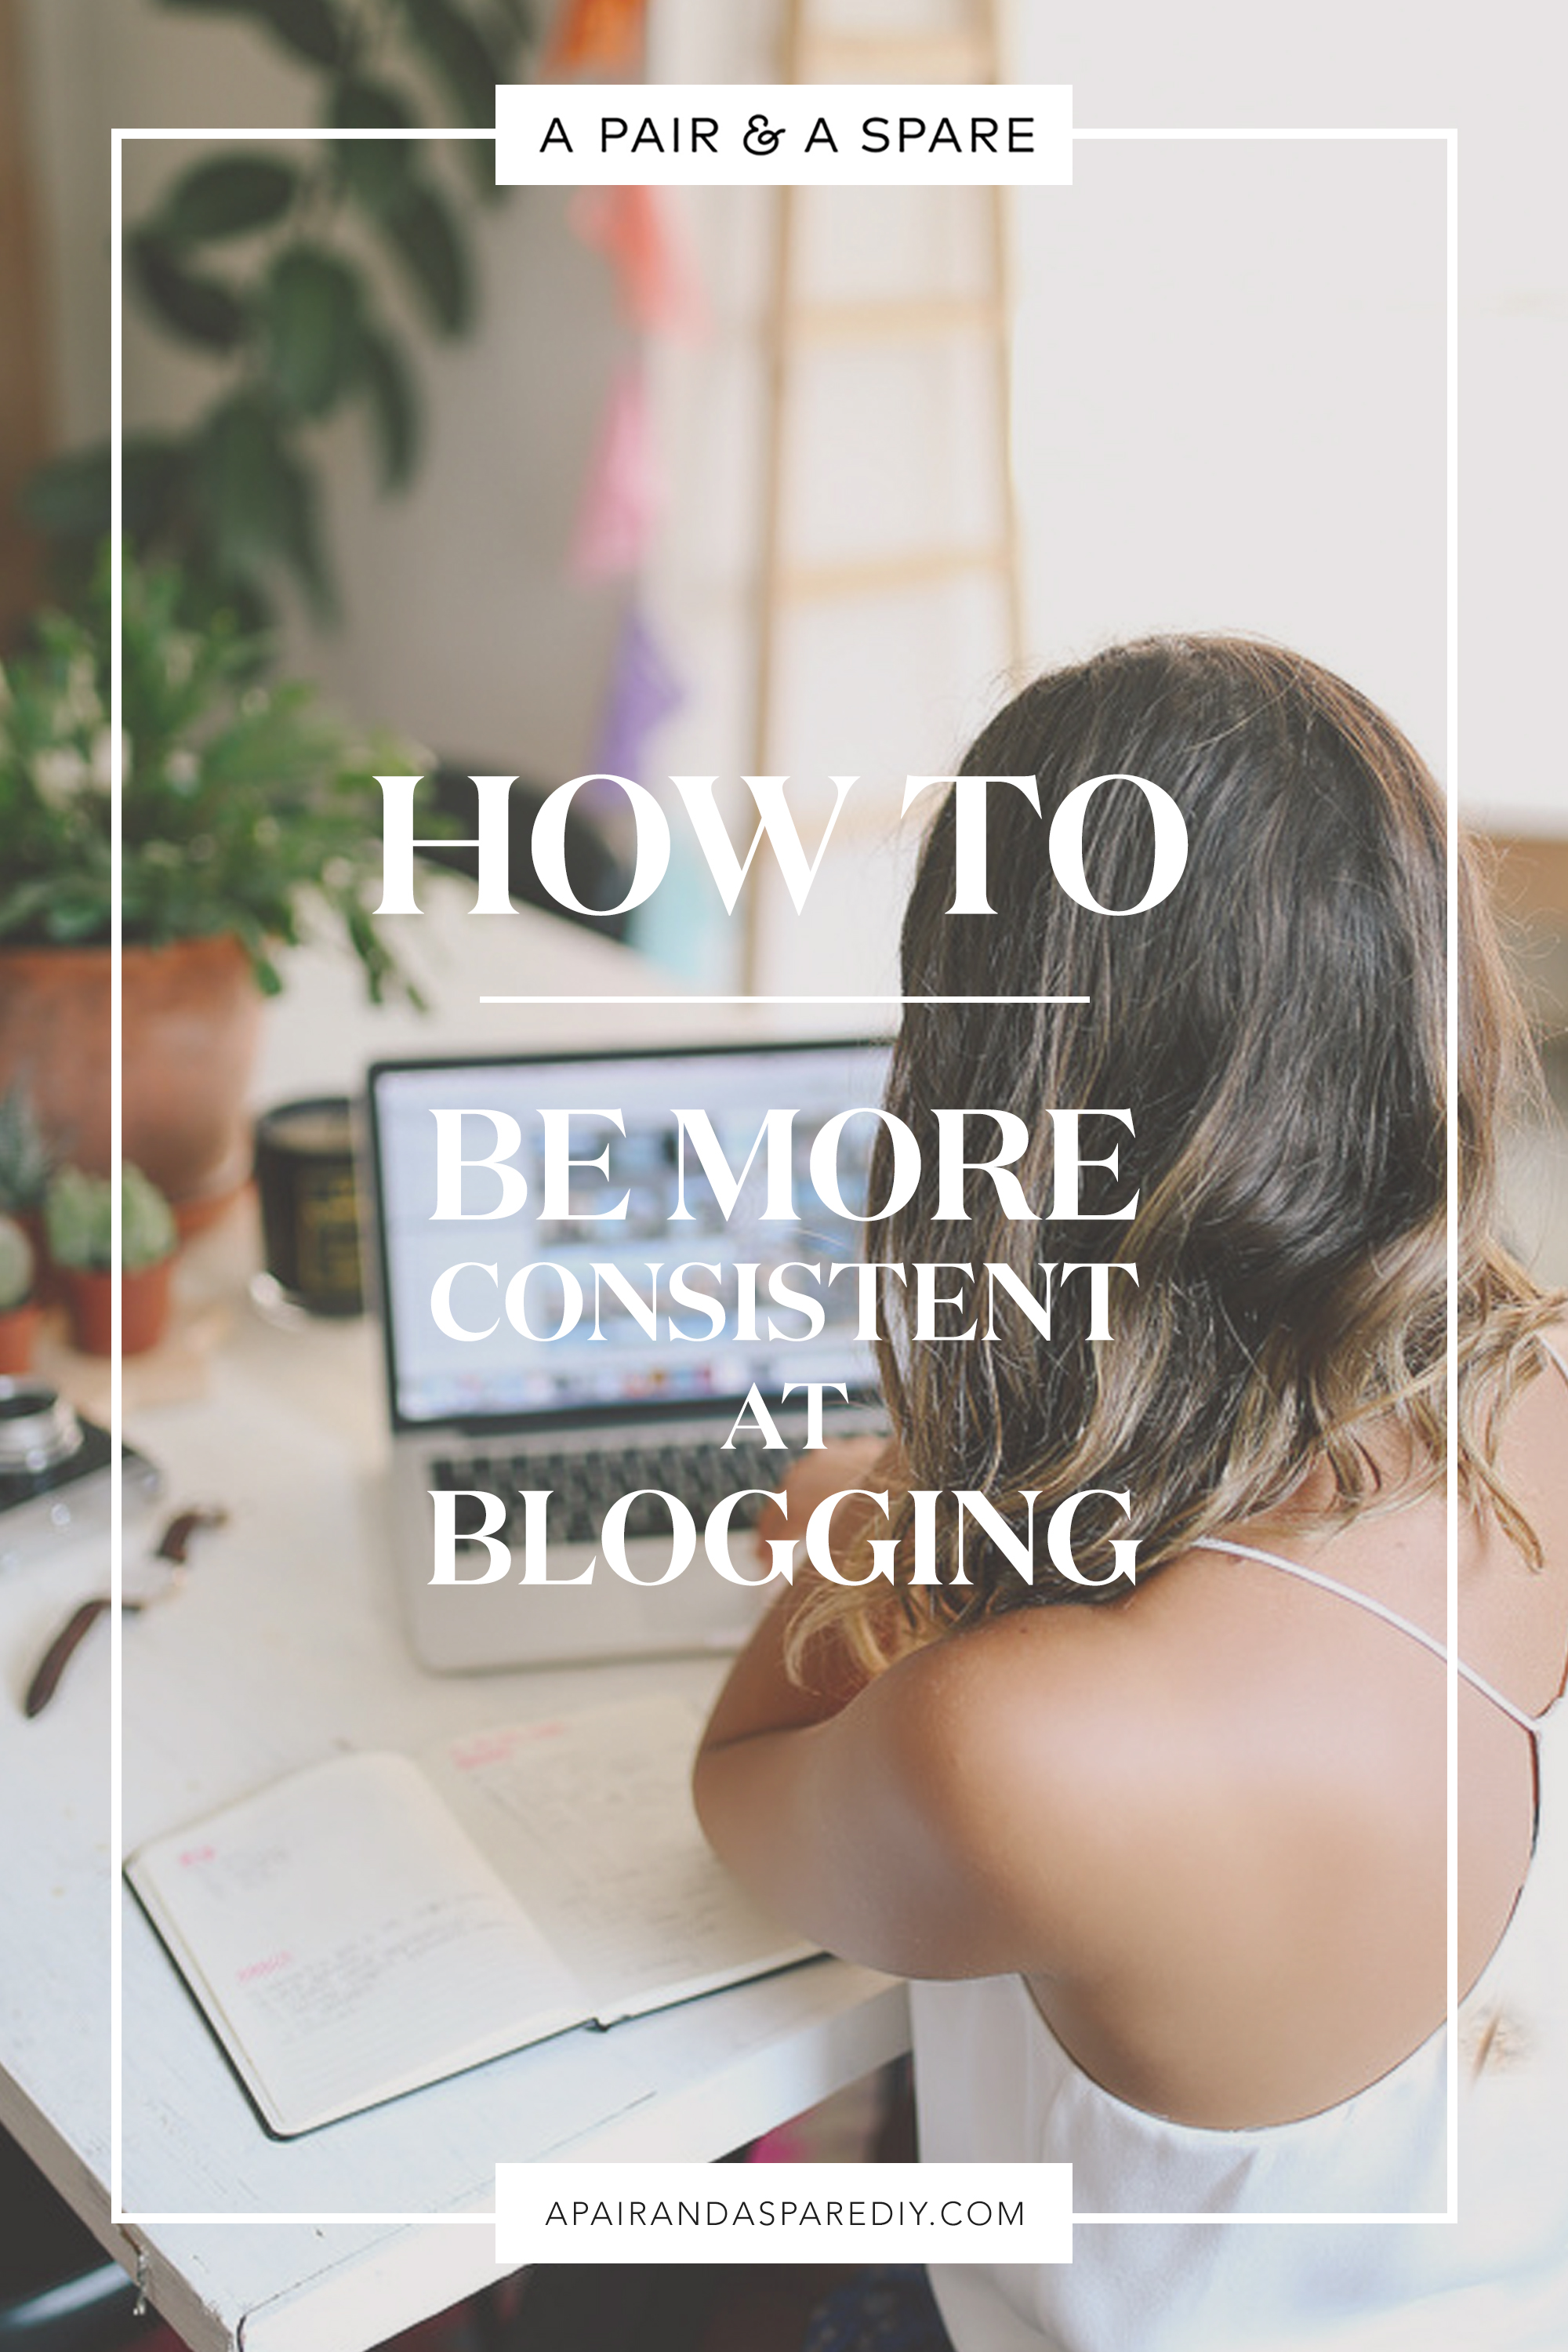 How to be more consistent at blogging